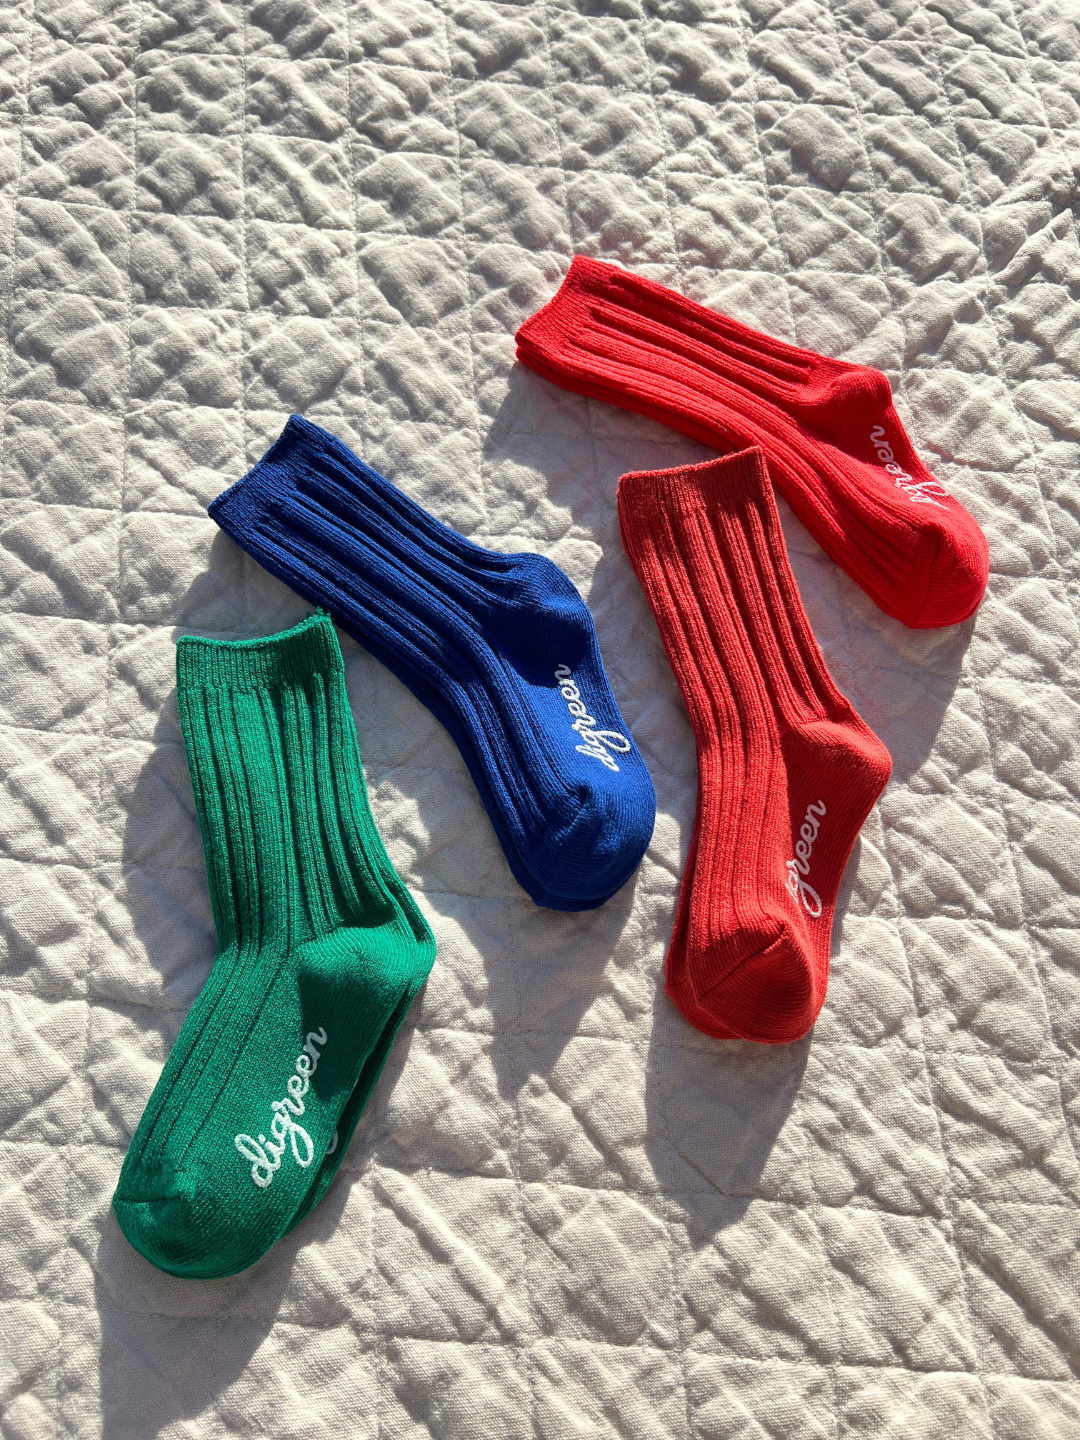 Four socks of each color of the kids' Pigment socks set laid in the sun on a quilt.